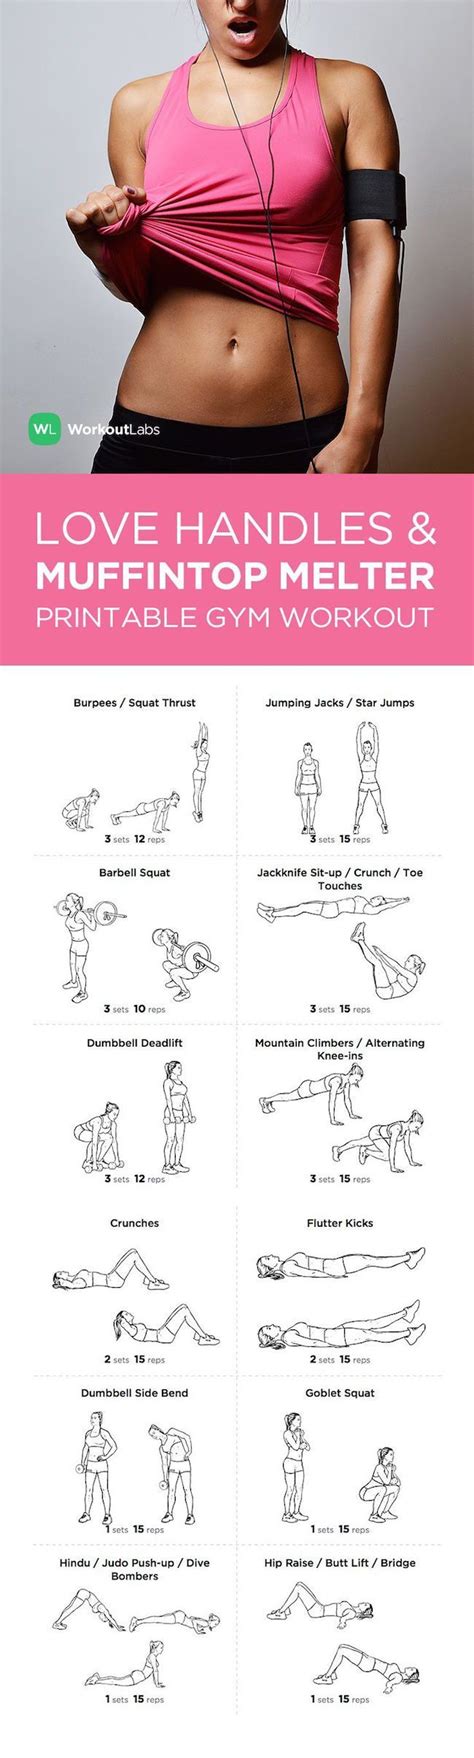 Bangingstyle The 11 Best Muffin Top Exercises Workout Fitness Body